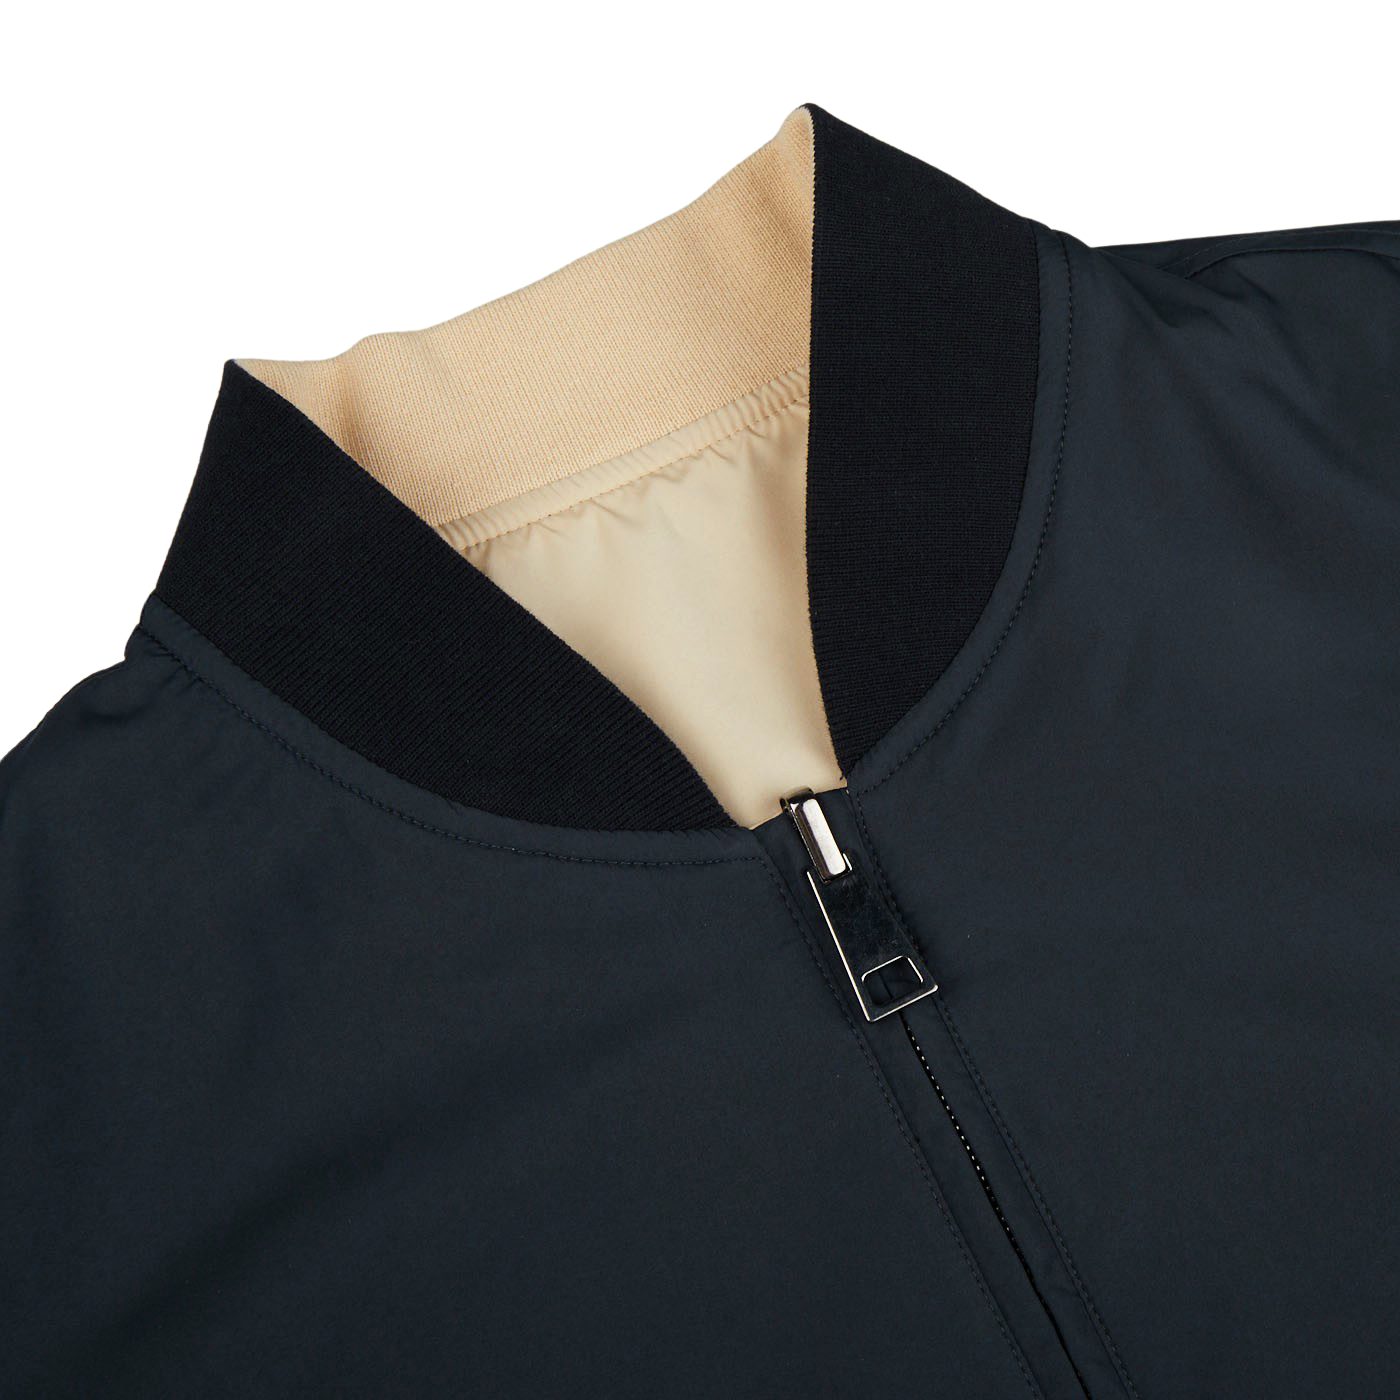 A Canali Navy Blue Beige Reversible Technical Blouson made of technical nylon material, featuring a zipper closure.